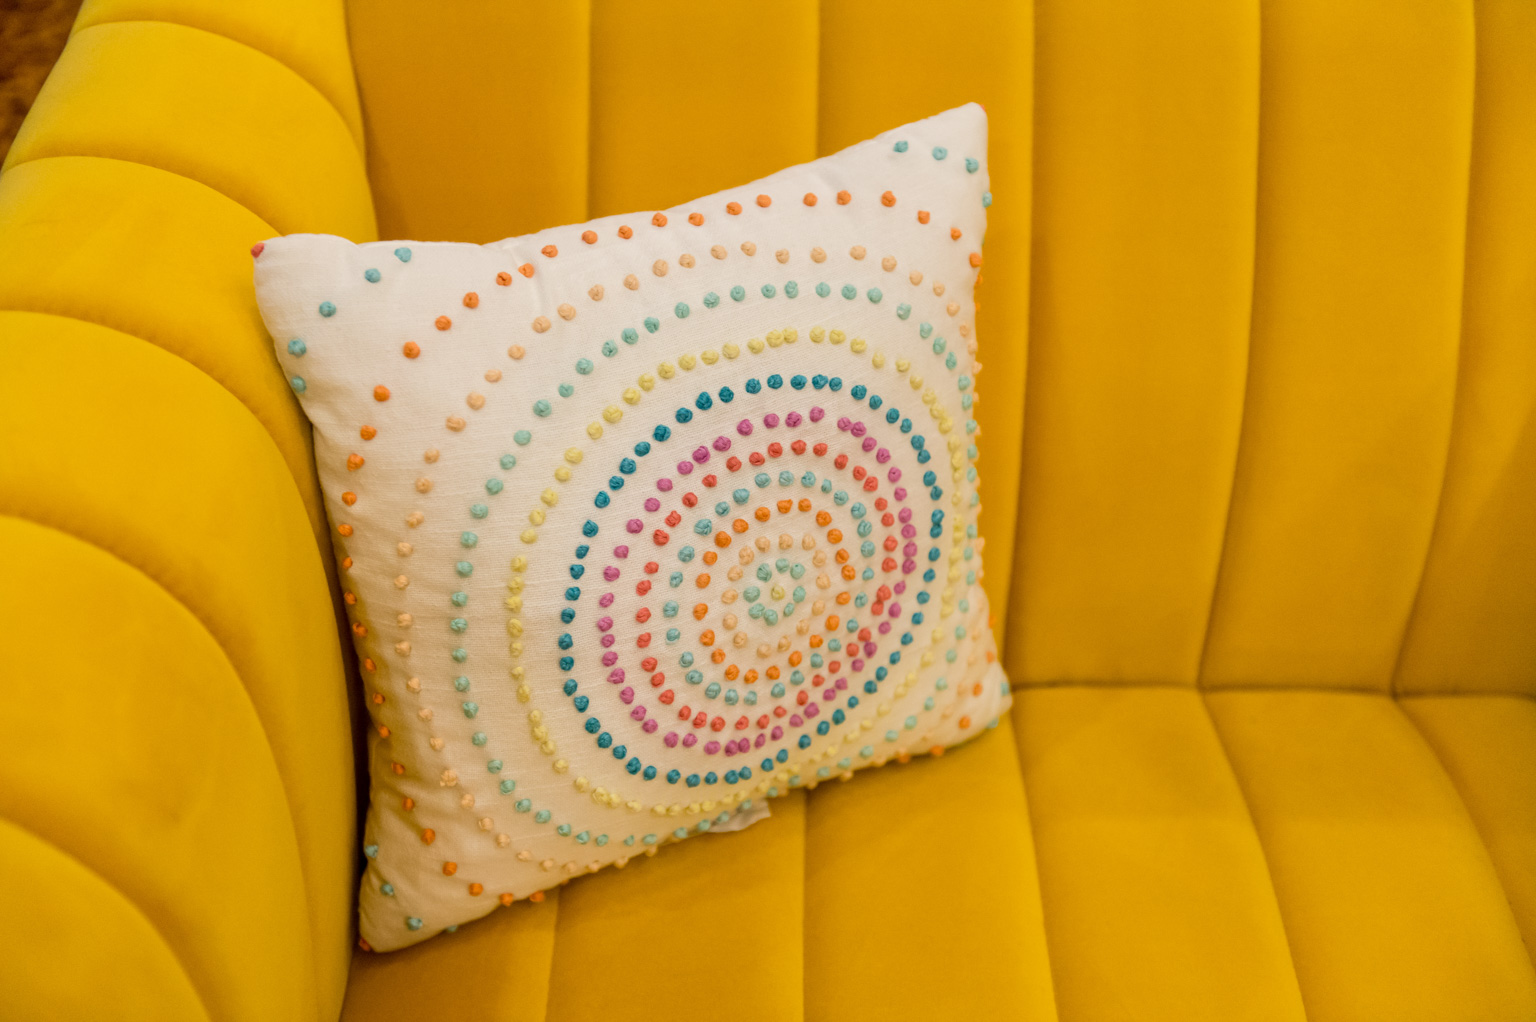 Pillow with rainbow texture on a couch, Product Photographers, Yellow Couch, Velvet Couch, Milwaukee Product Photographer, Pillow